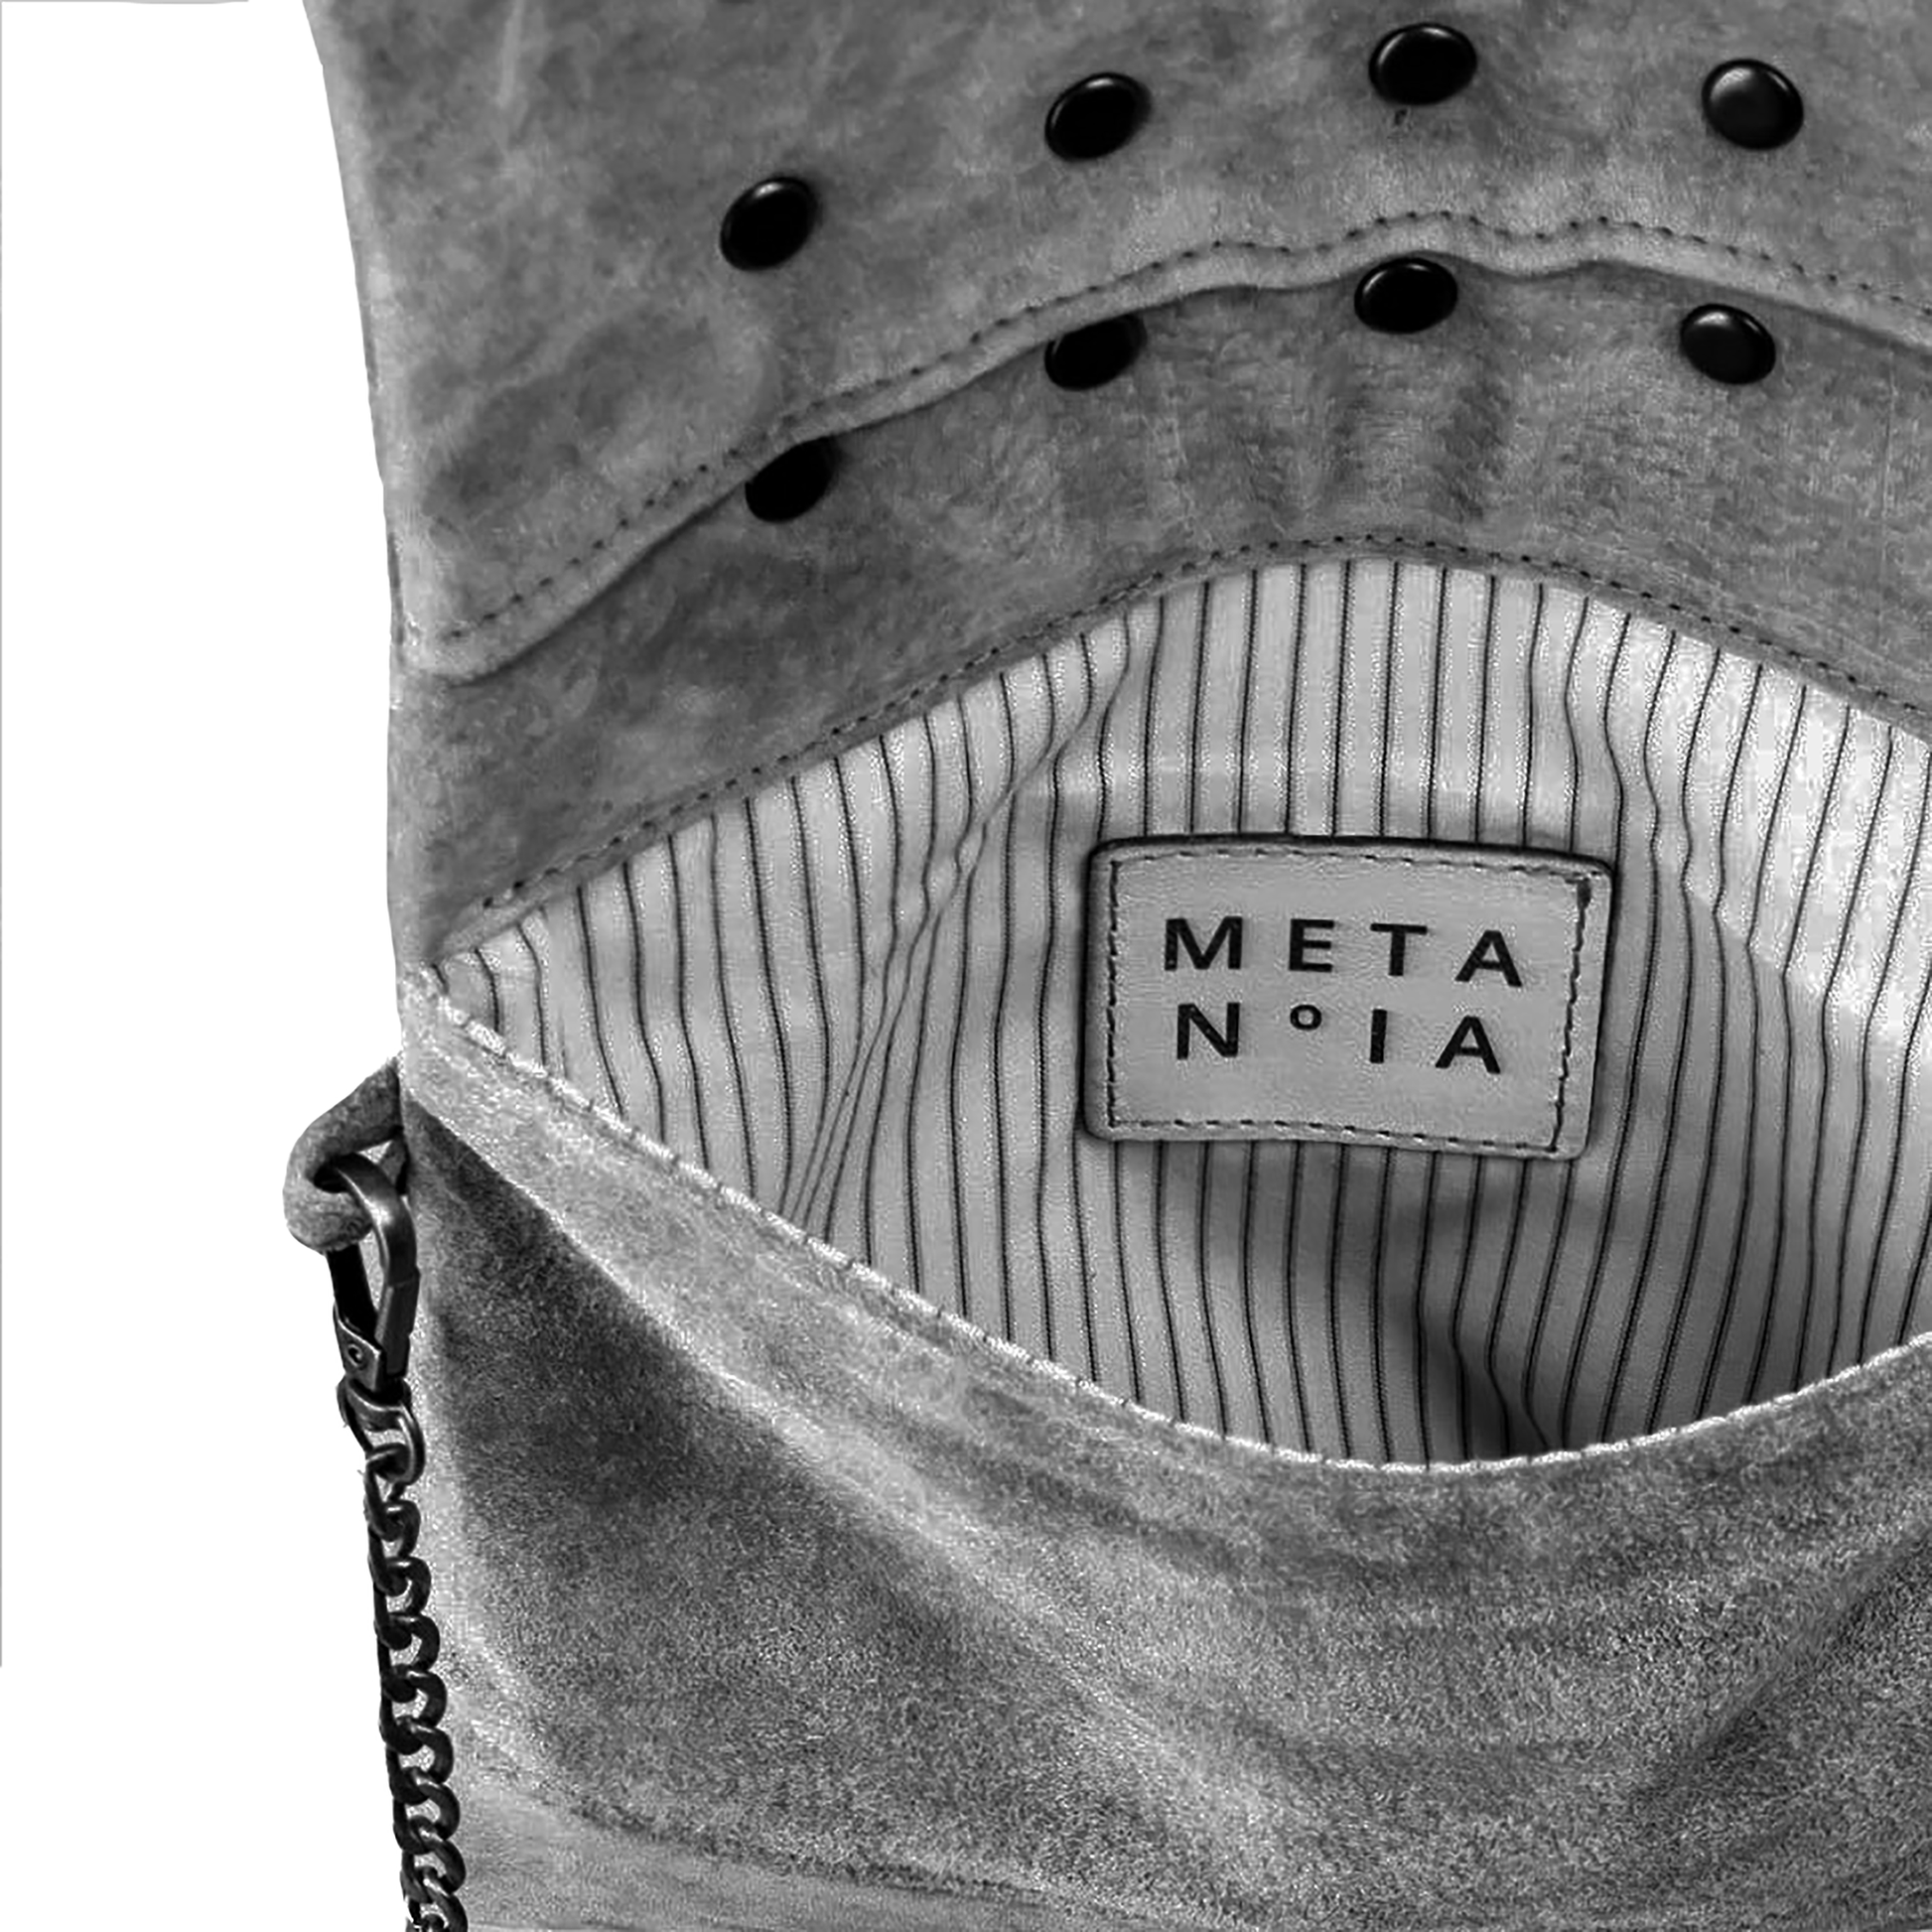 METANoIA The Disco Small Bag inside featuring pinstripe fabric sourced from recycled fabric and a caramel leather woven label lasered with the iconic METANoIA label.